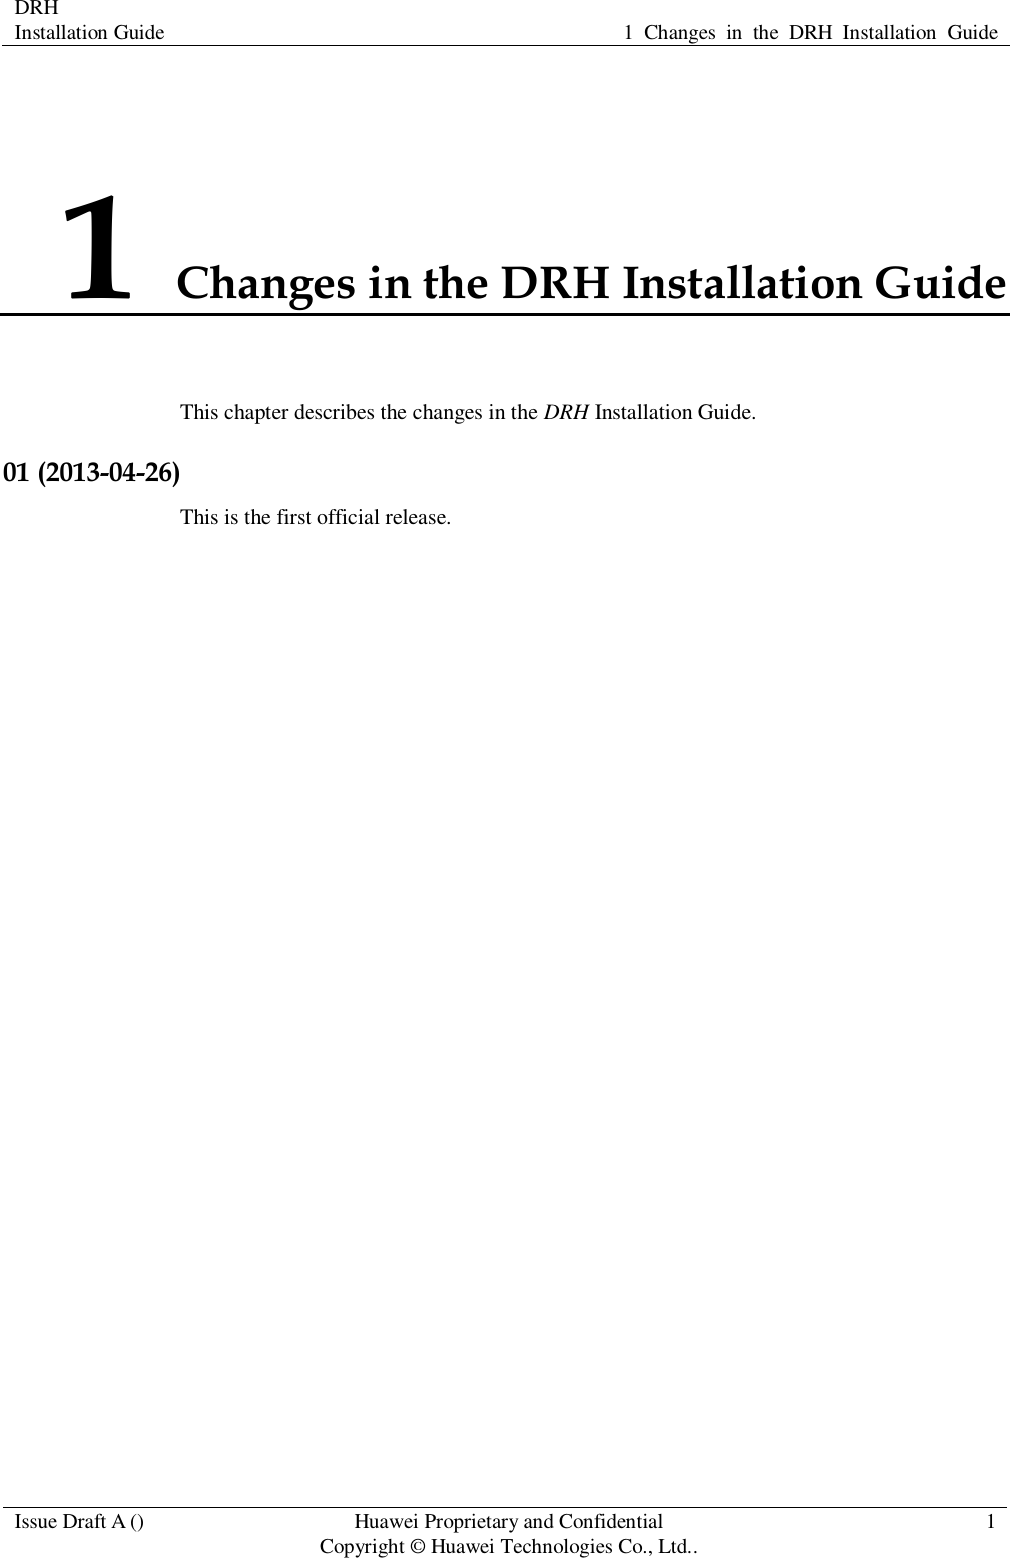 DRH   Installation Guide 1  Changes  in  the  DRH  Installation  Guide  Issue Draft A () Huawei Proprietary and Confidential                                     Copyright © Huawei Technologies Co., Ltd.. 1  1 Changes in the DRH Installation Guide This chapter describes the changes in the DRH Installation Guide. 01 (2013-04-26) This is the first official release.                       